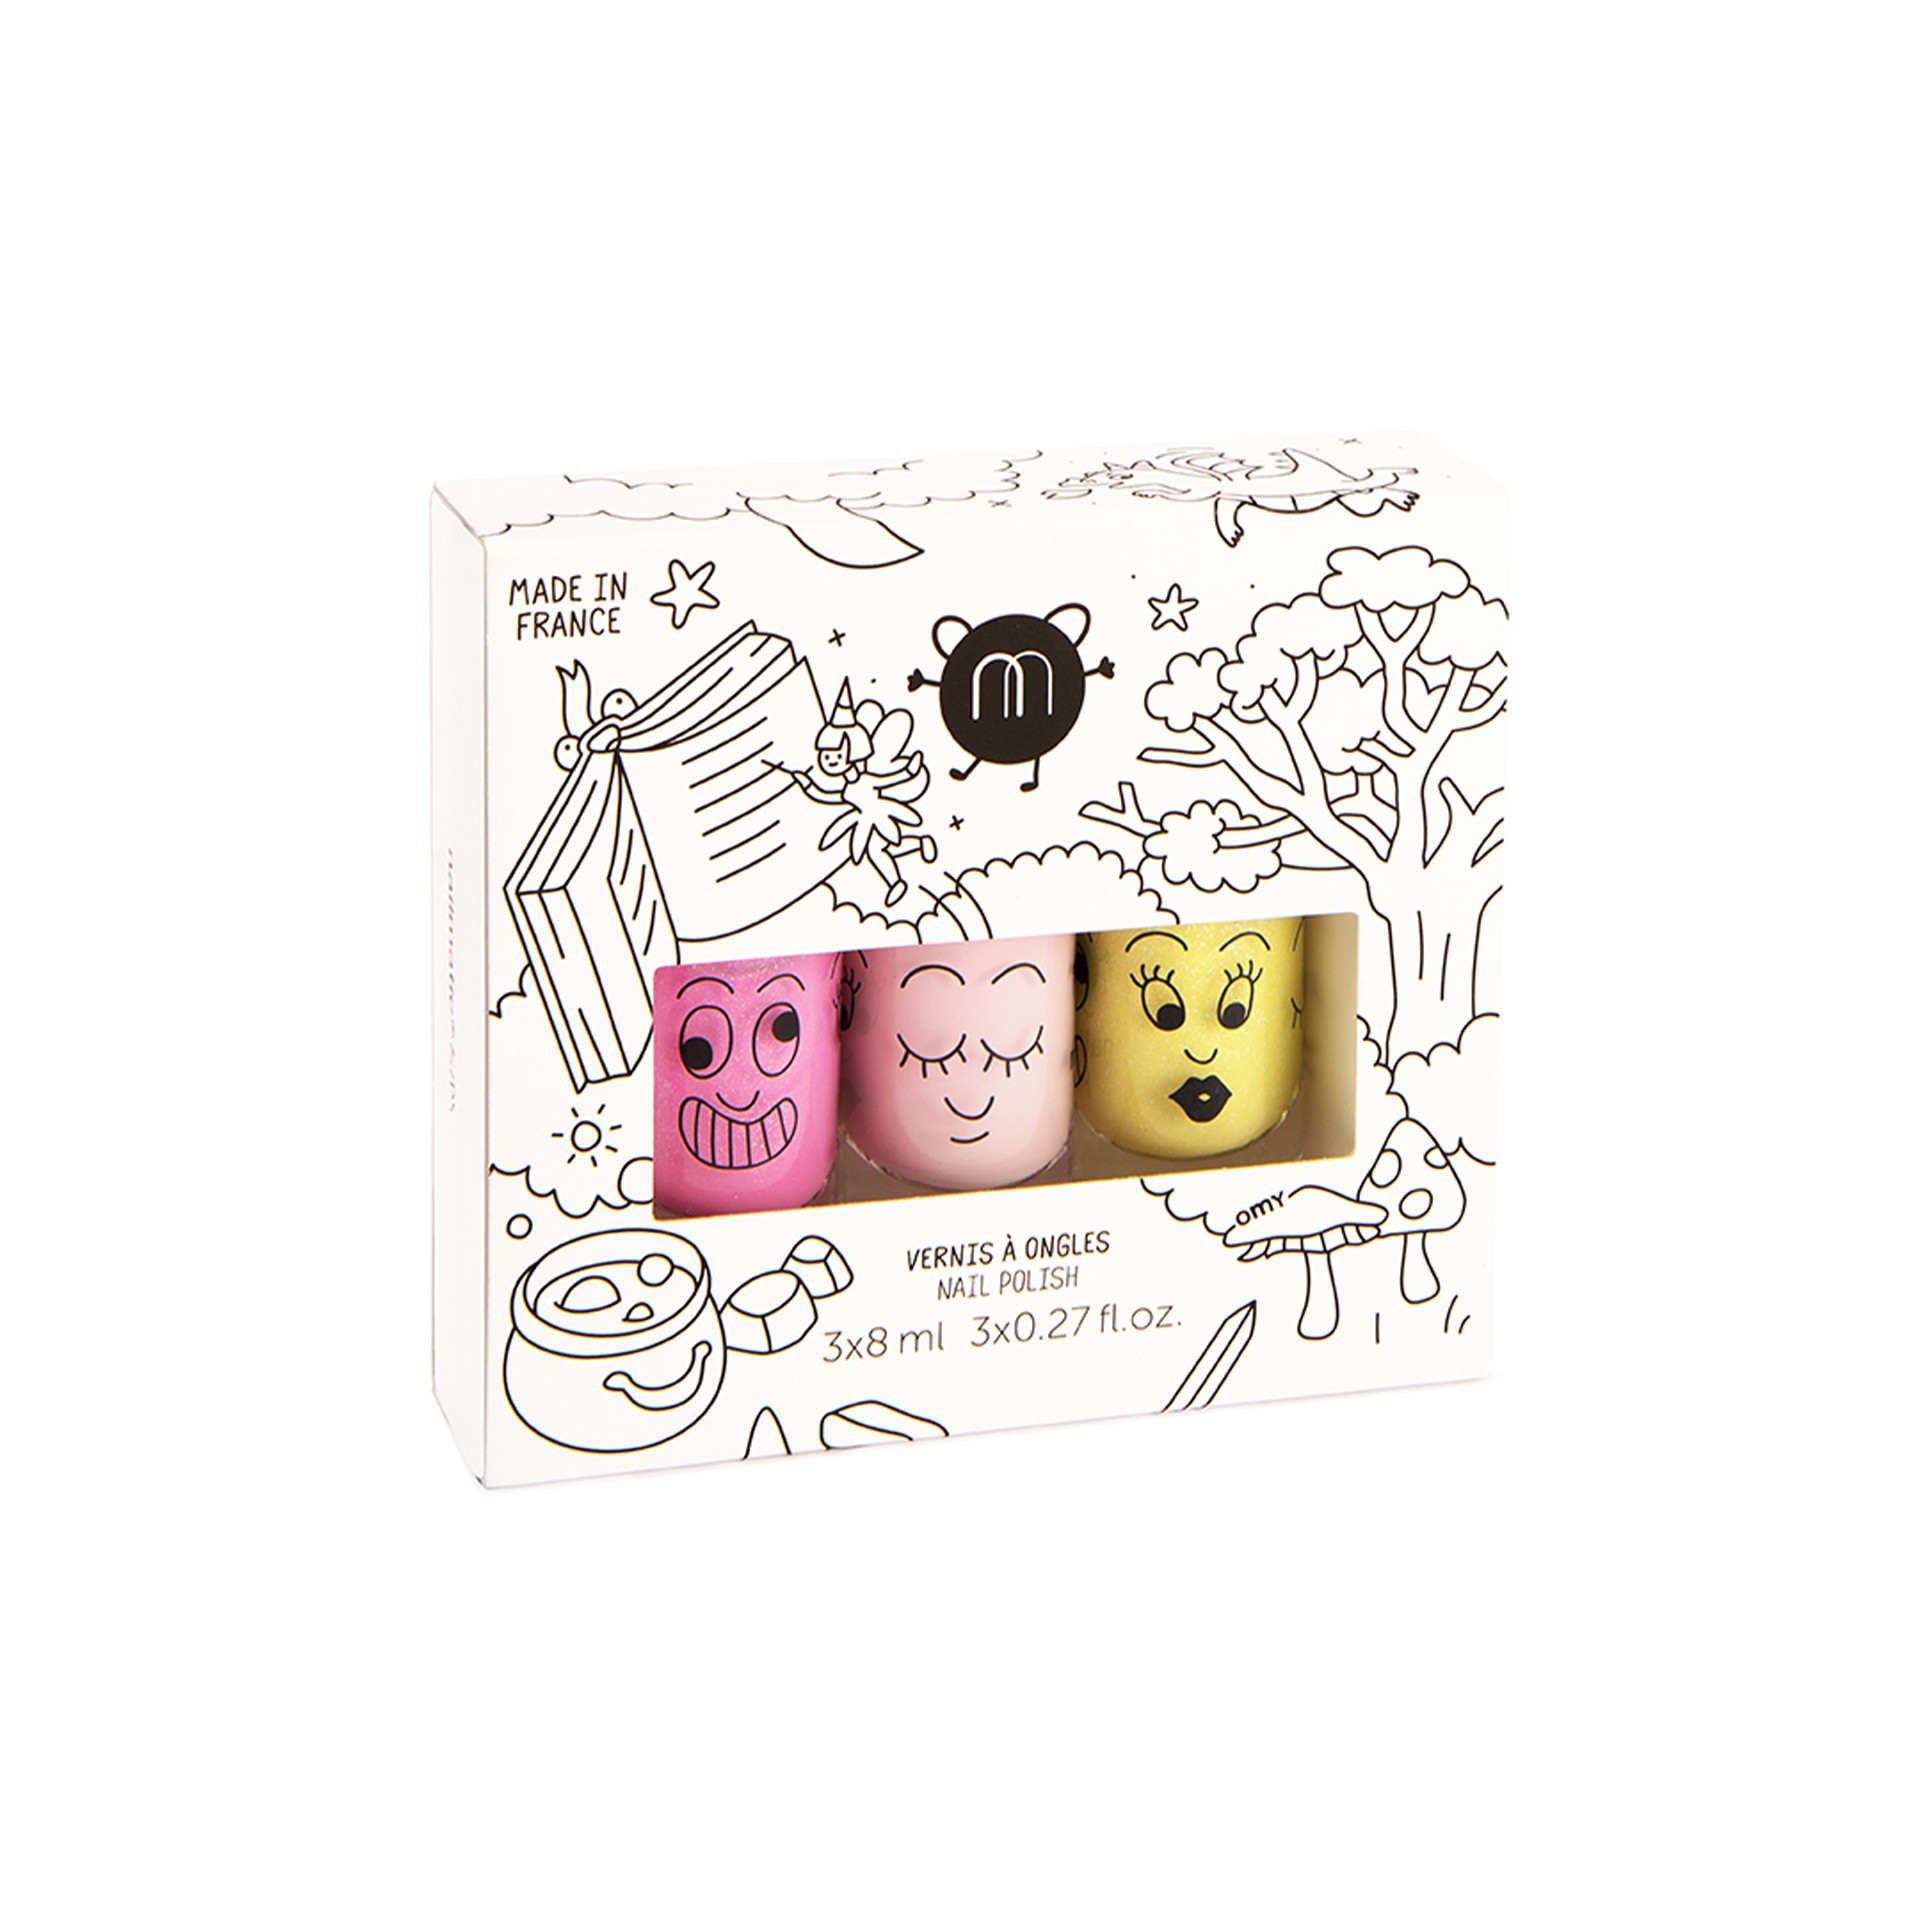 magic forest 3 vernis coffret vernis à ongles lulu bella dolly maquillage enfant nailmatic kids